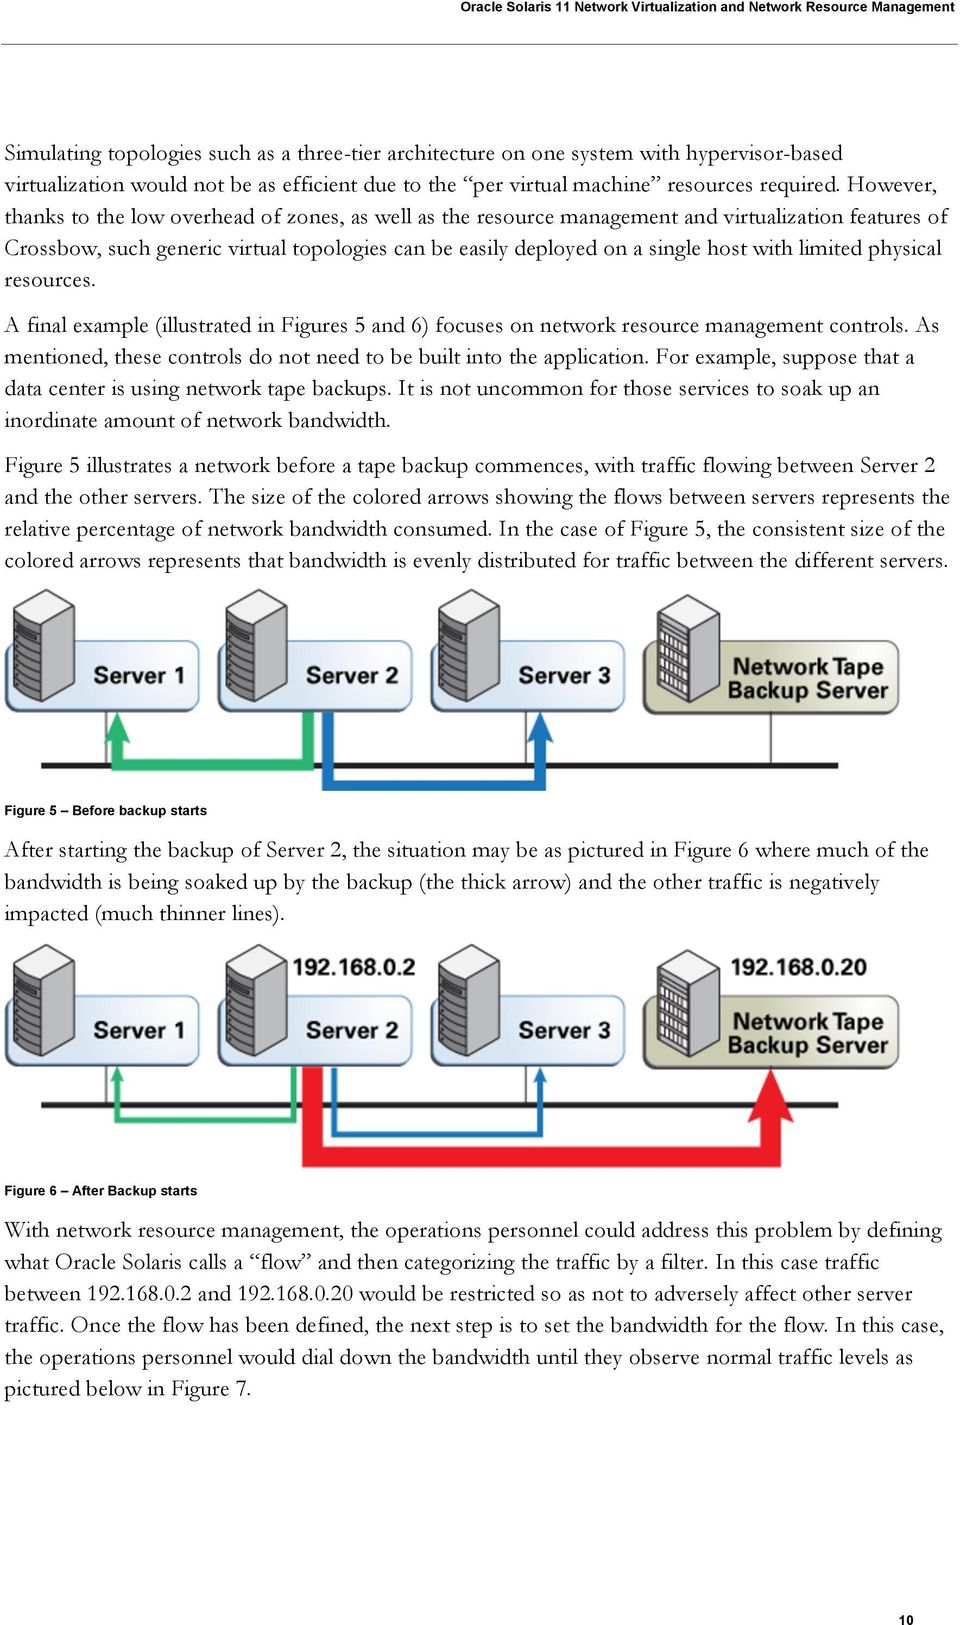 limited physical resources. A final example (illustrated in Figures 5 and 6) focuses on network resource management controls. As mentioned, these controls do not need to be built into the application.